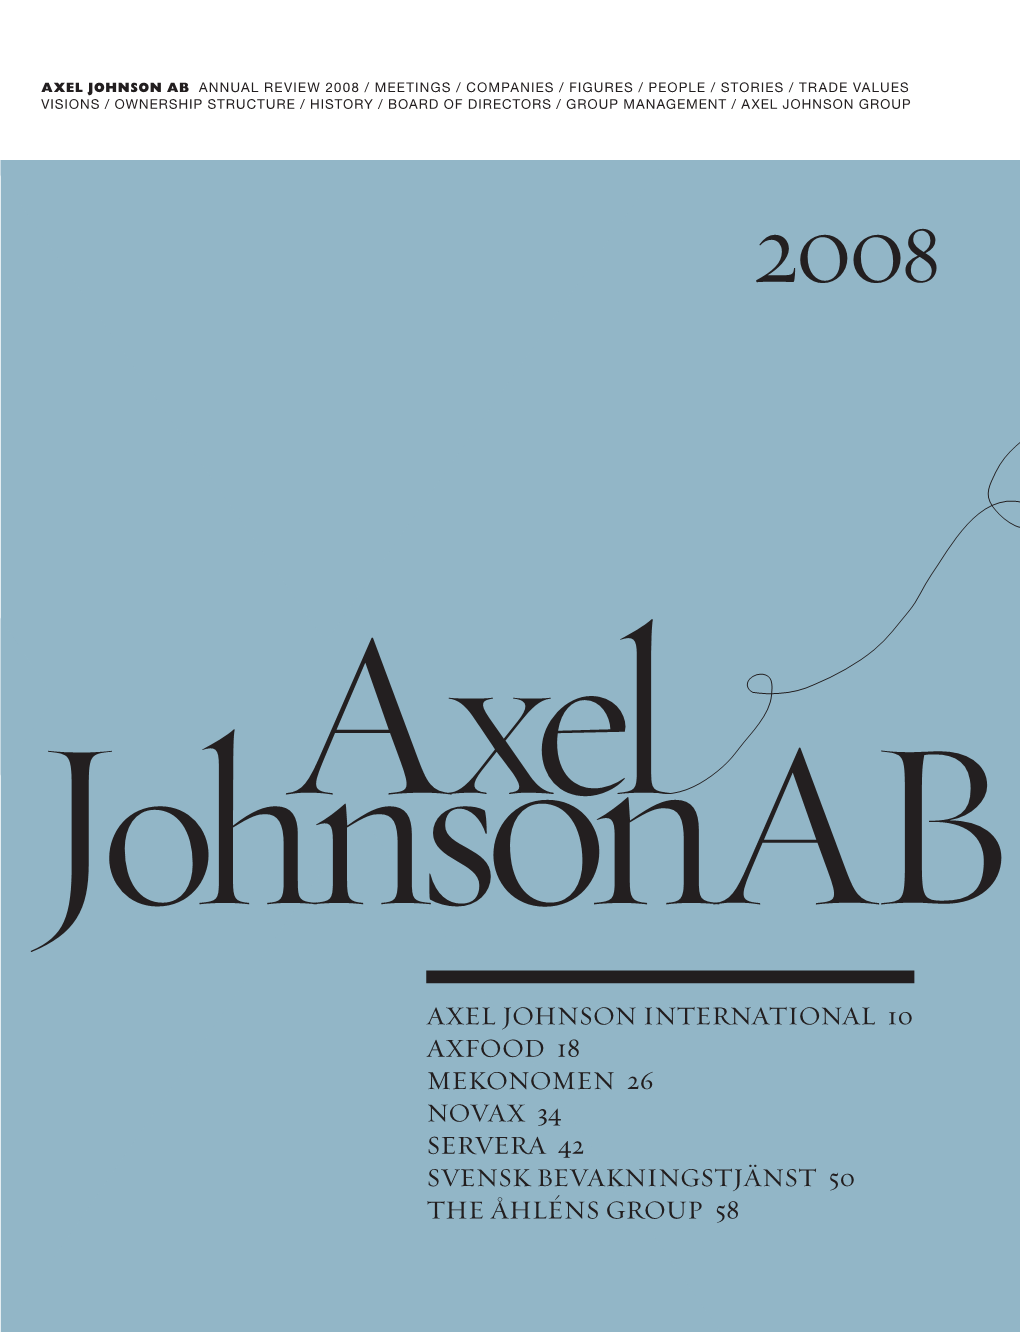 2008 Annual Review Axel Johnson